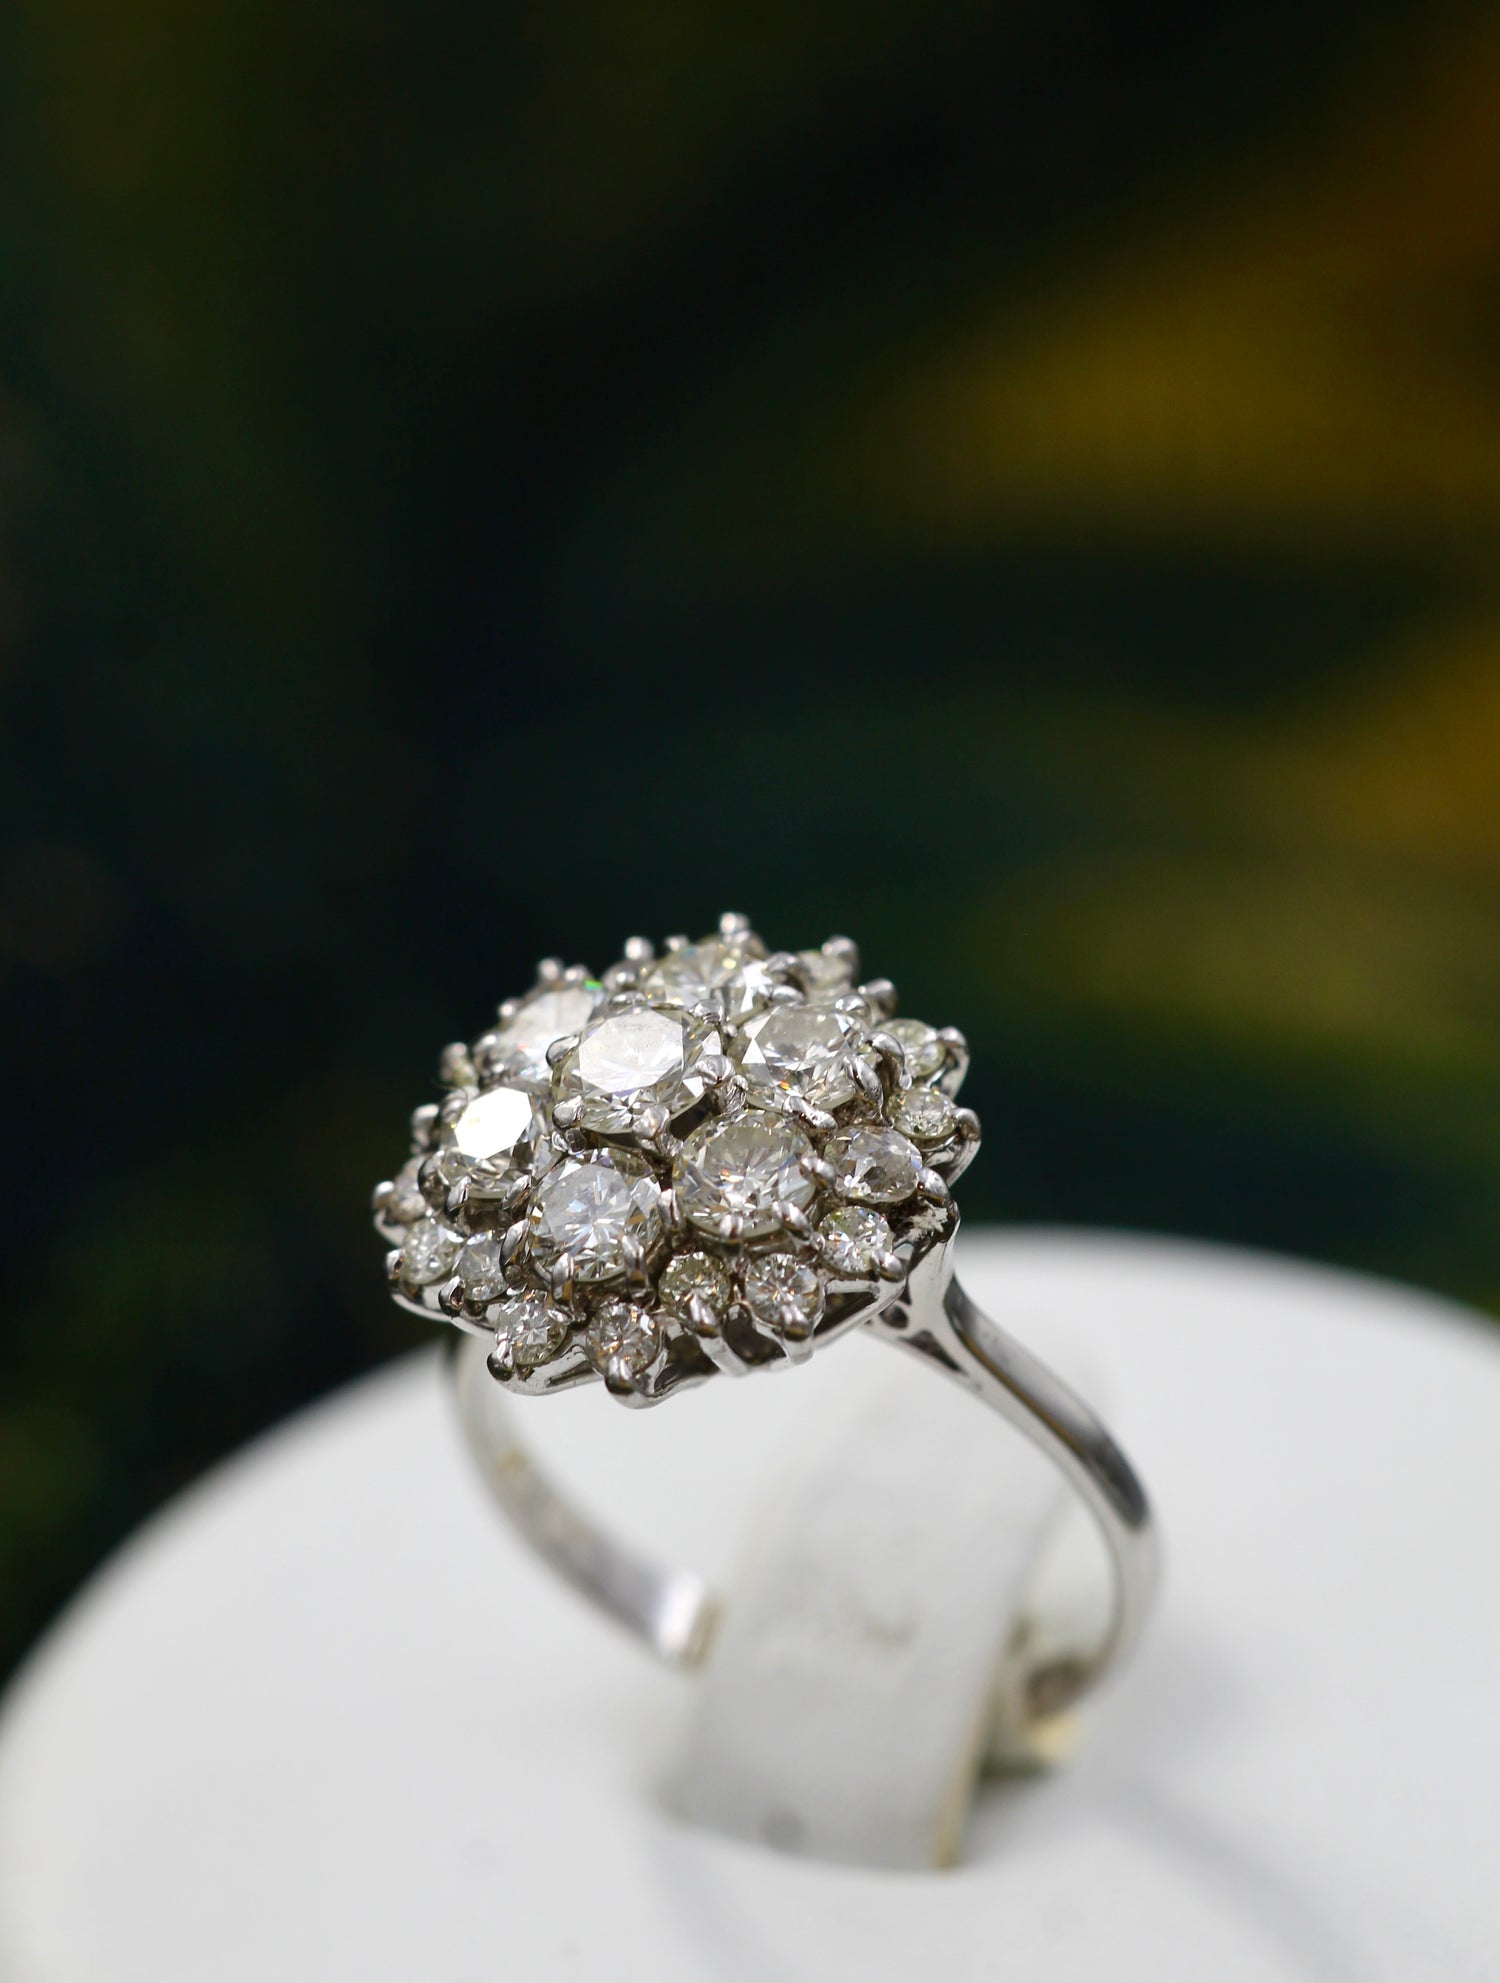 A very fine 18 carat White Gold Diamond Cluster Ring - Robin Haydock Antiques